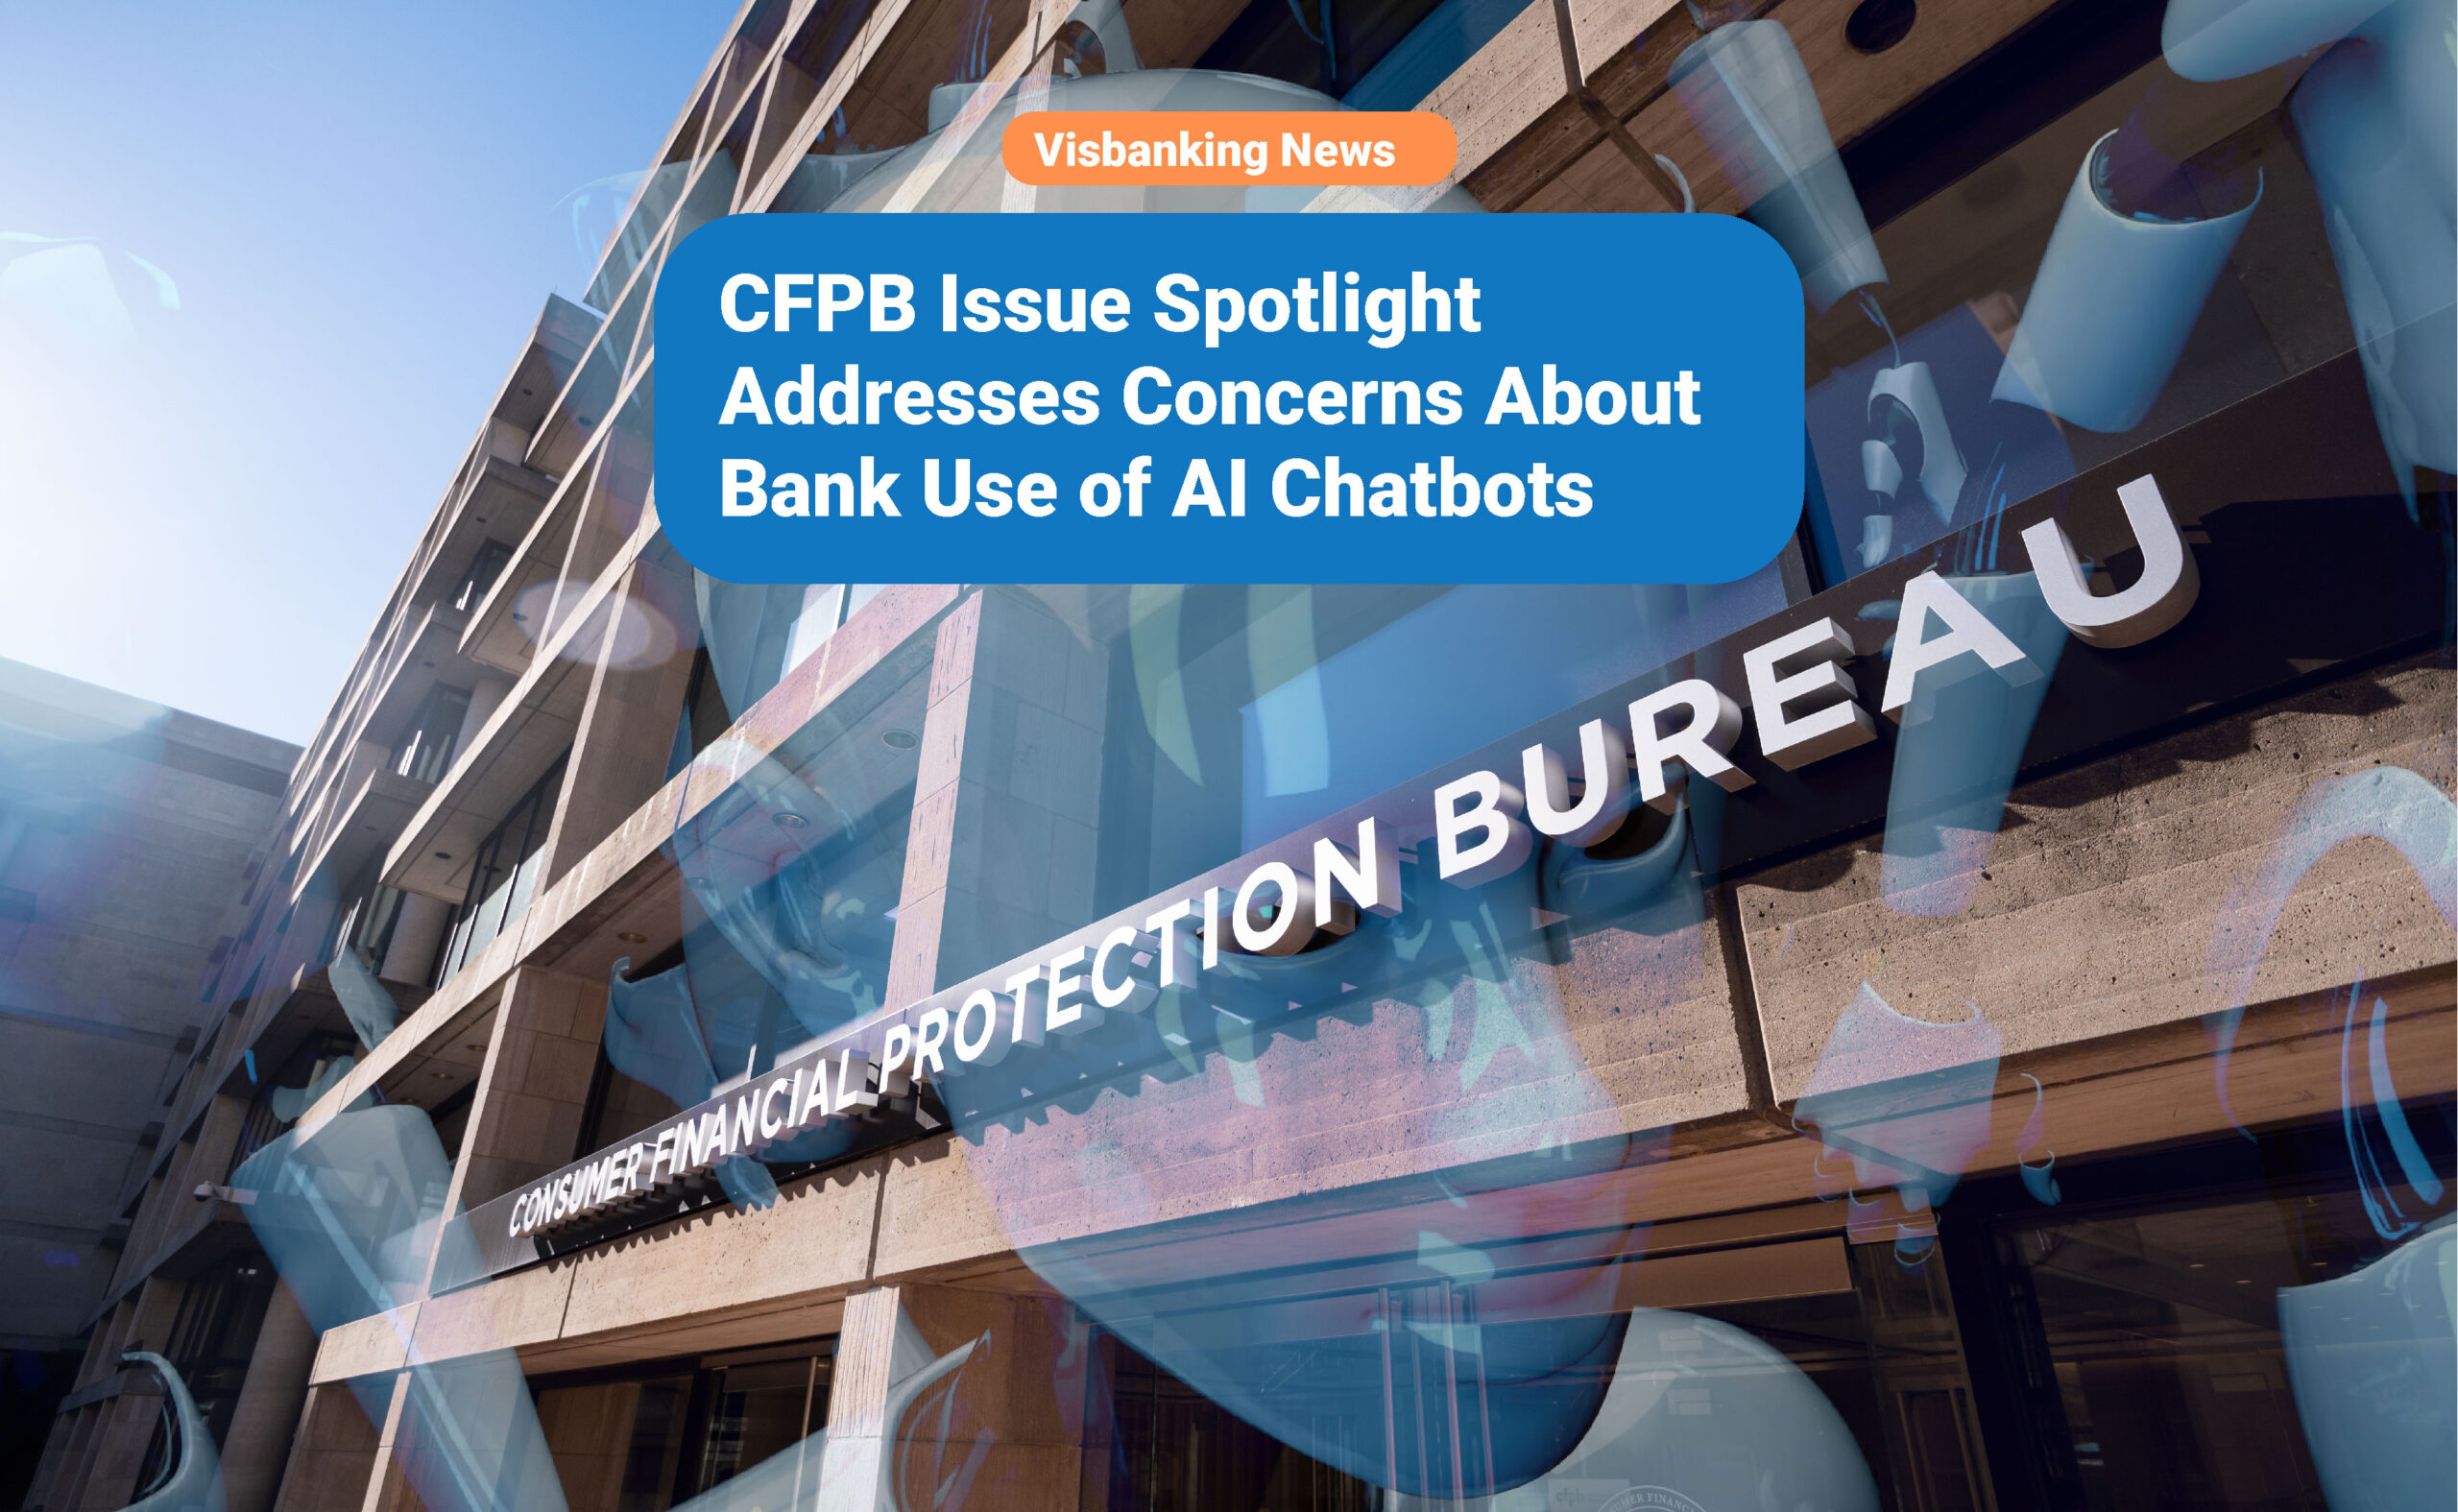 CFPB Issue Spotlight Addresses Concerns About Bank Use of AI Chatbots